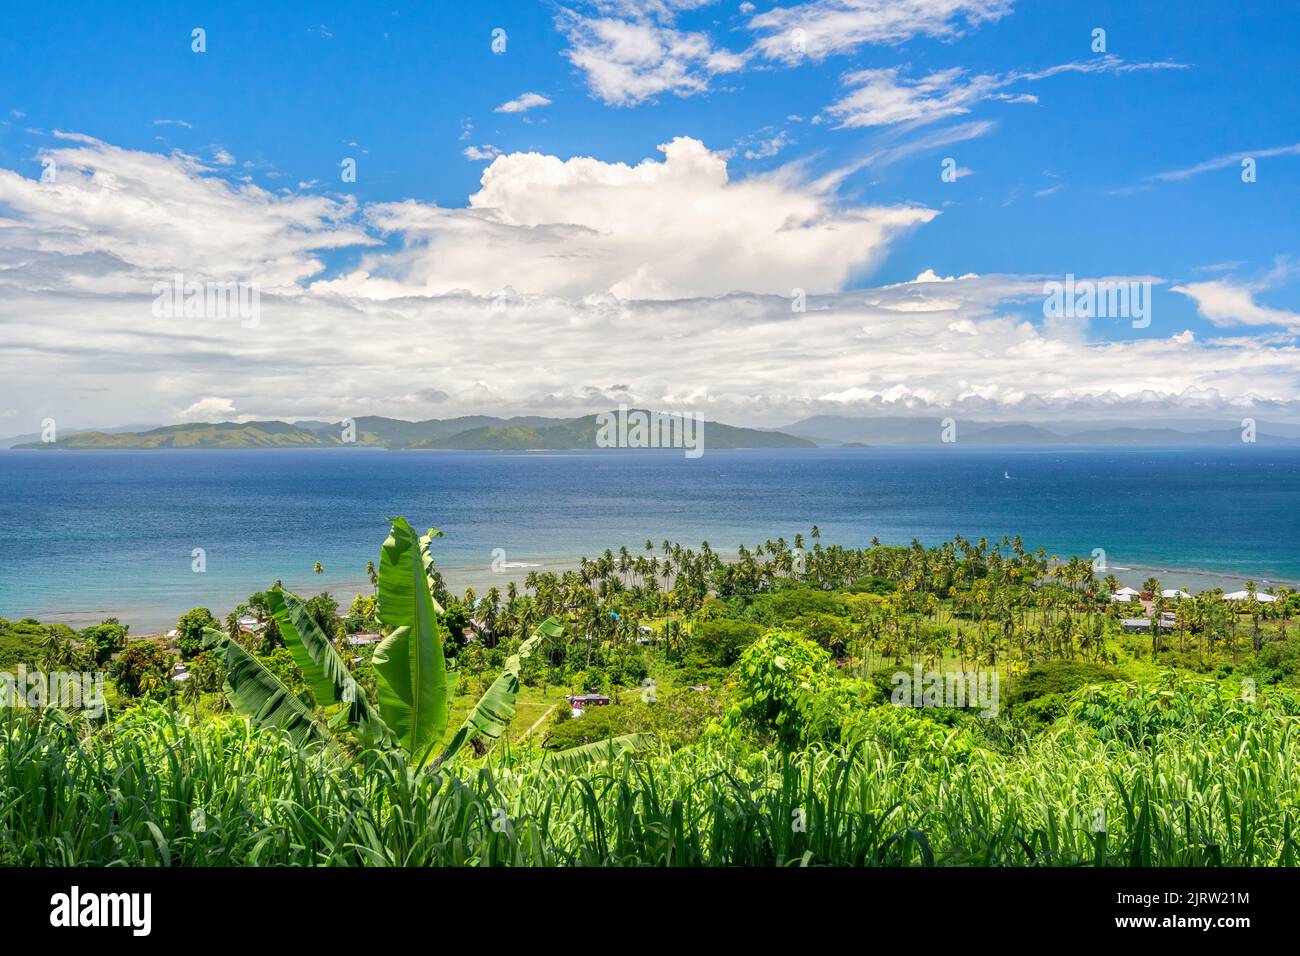 Cliffside overlook from a lush, tropical viewpoint shows the beautiful blue sky and water surrounded by green foliage. Stock Photo